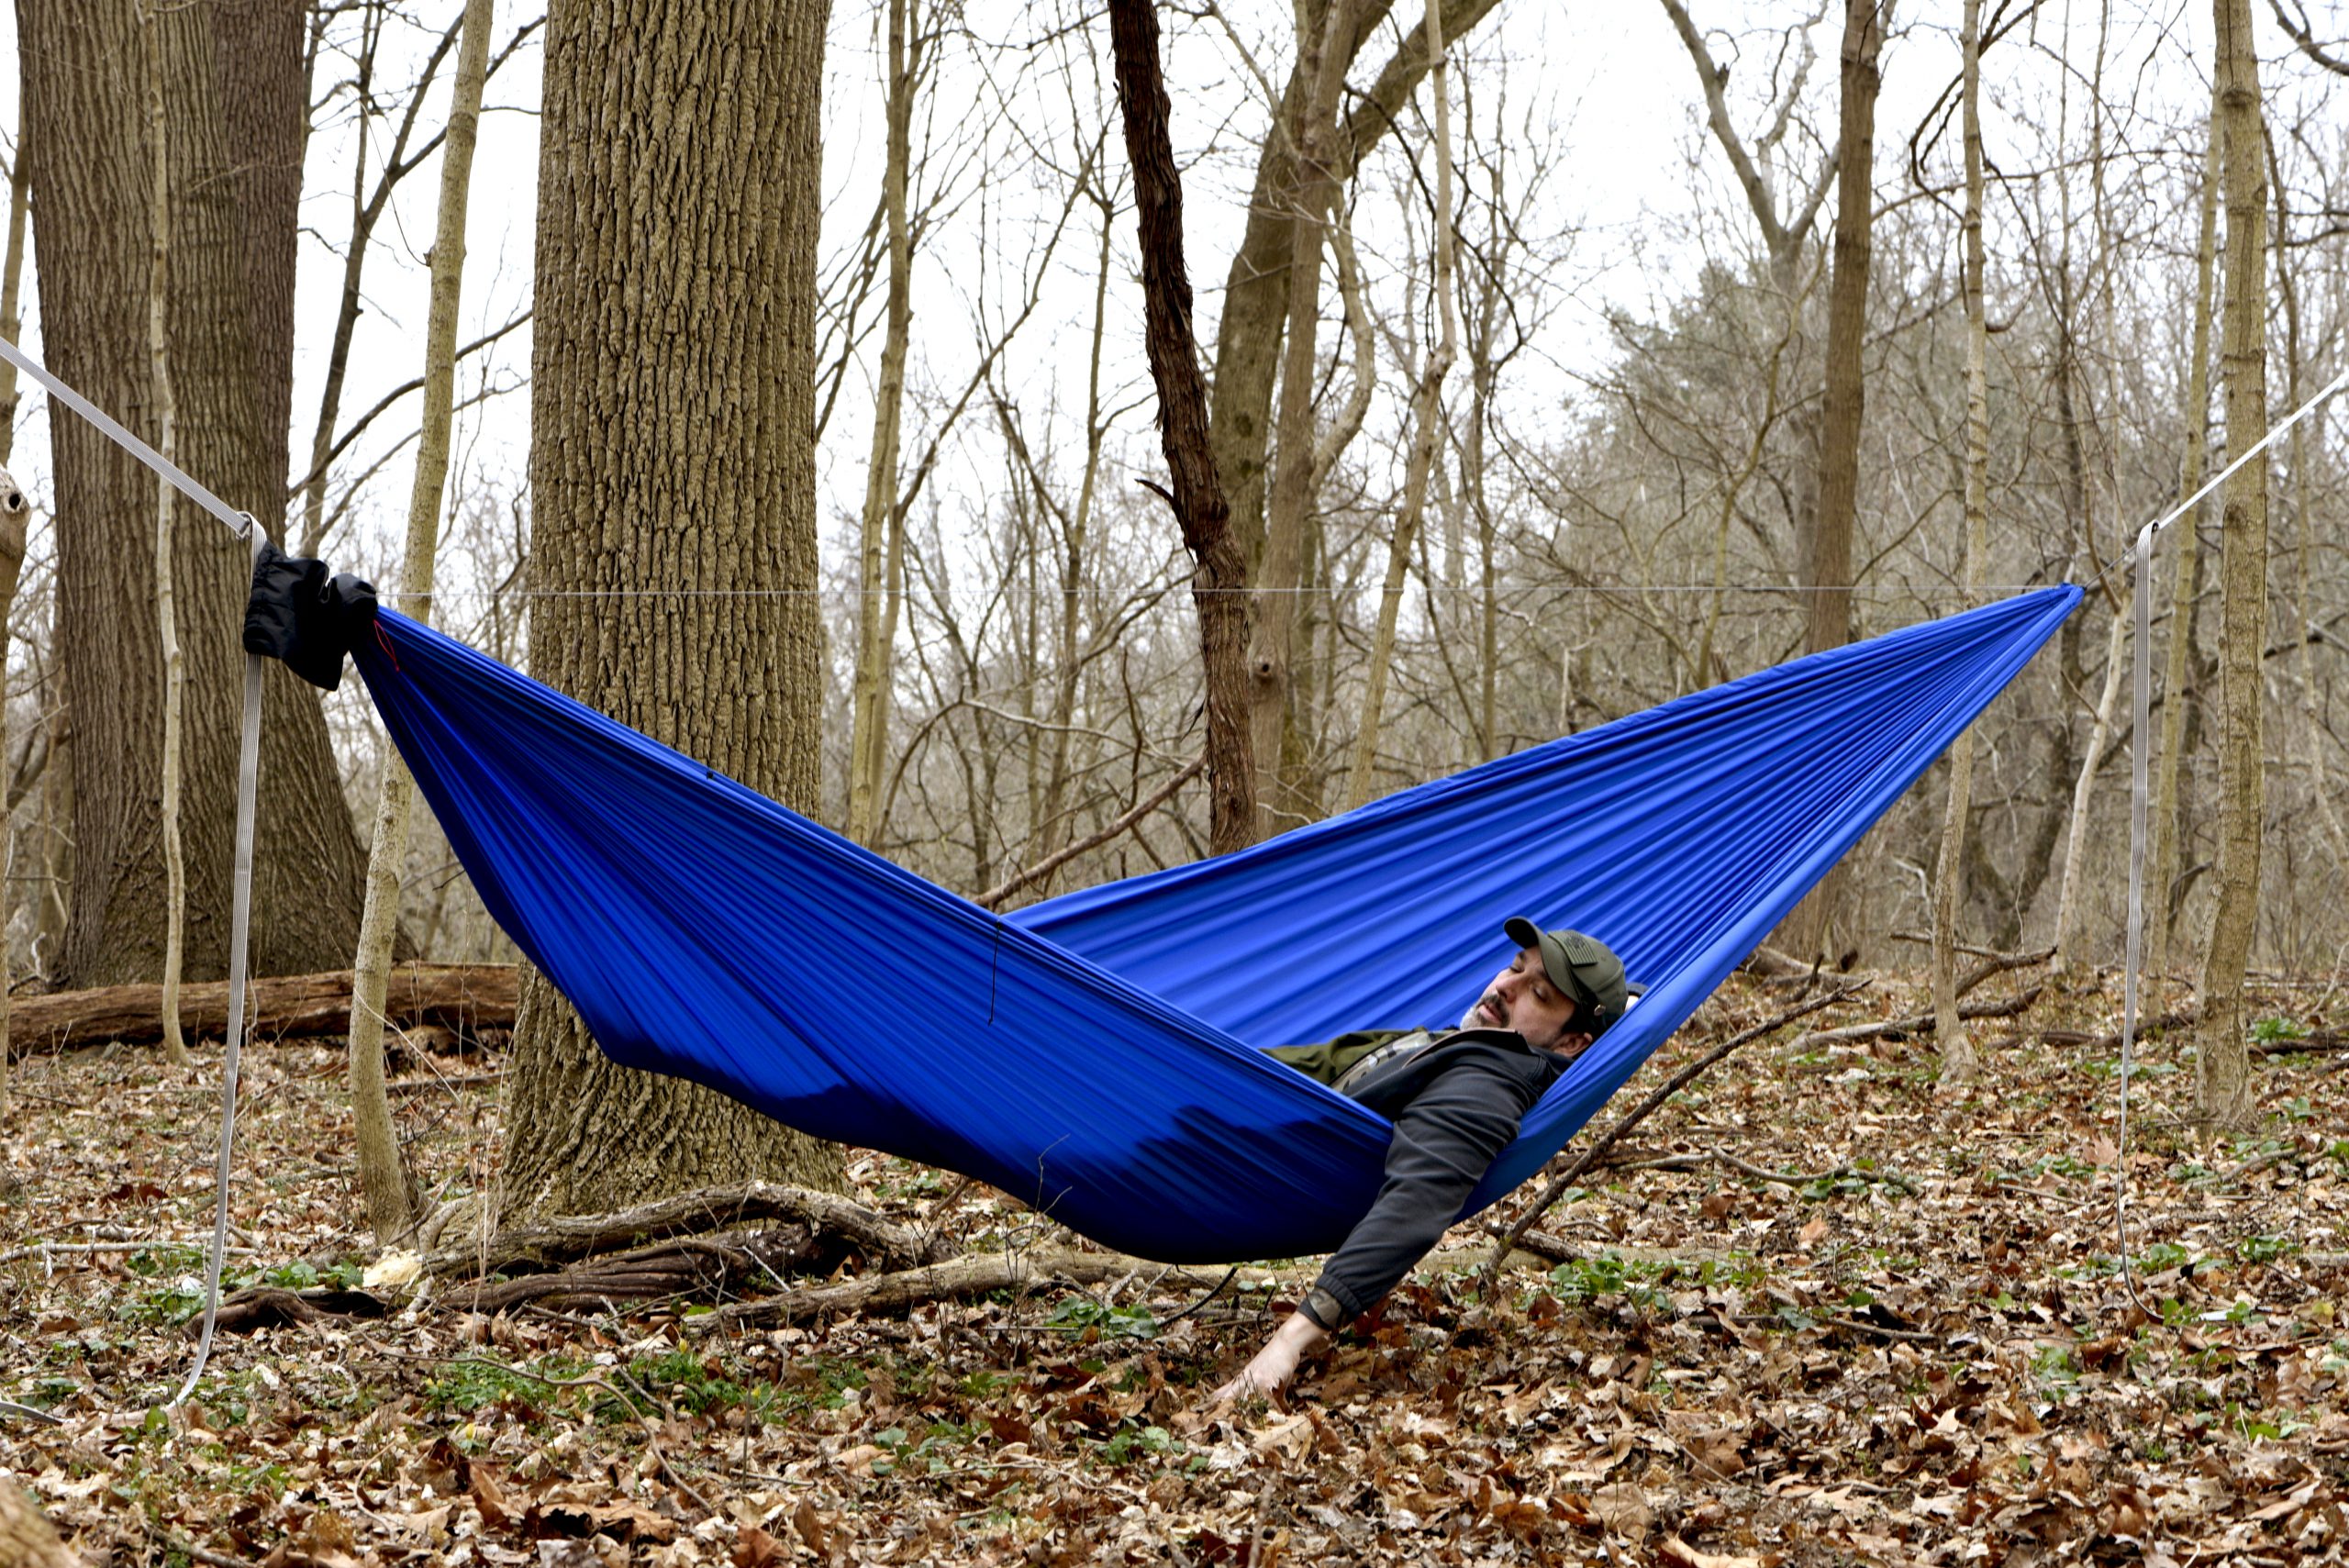 How To Lay In A Hammock